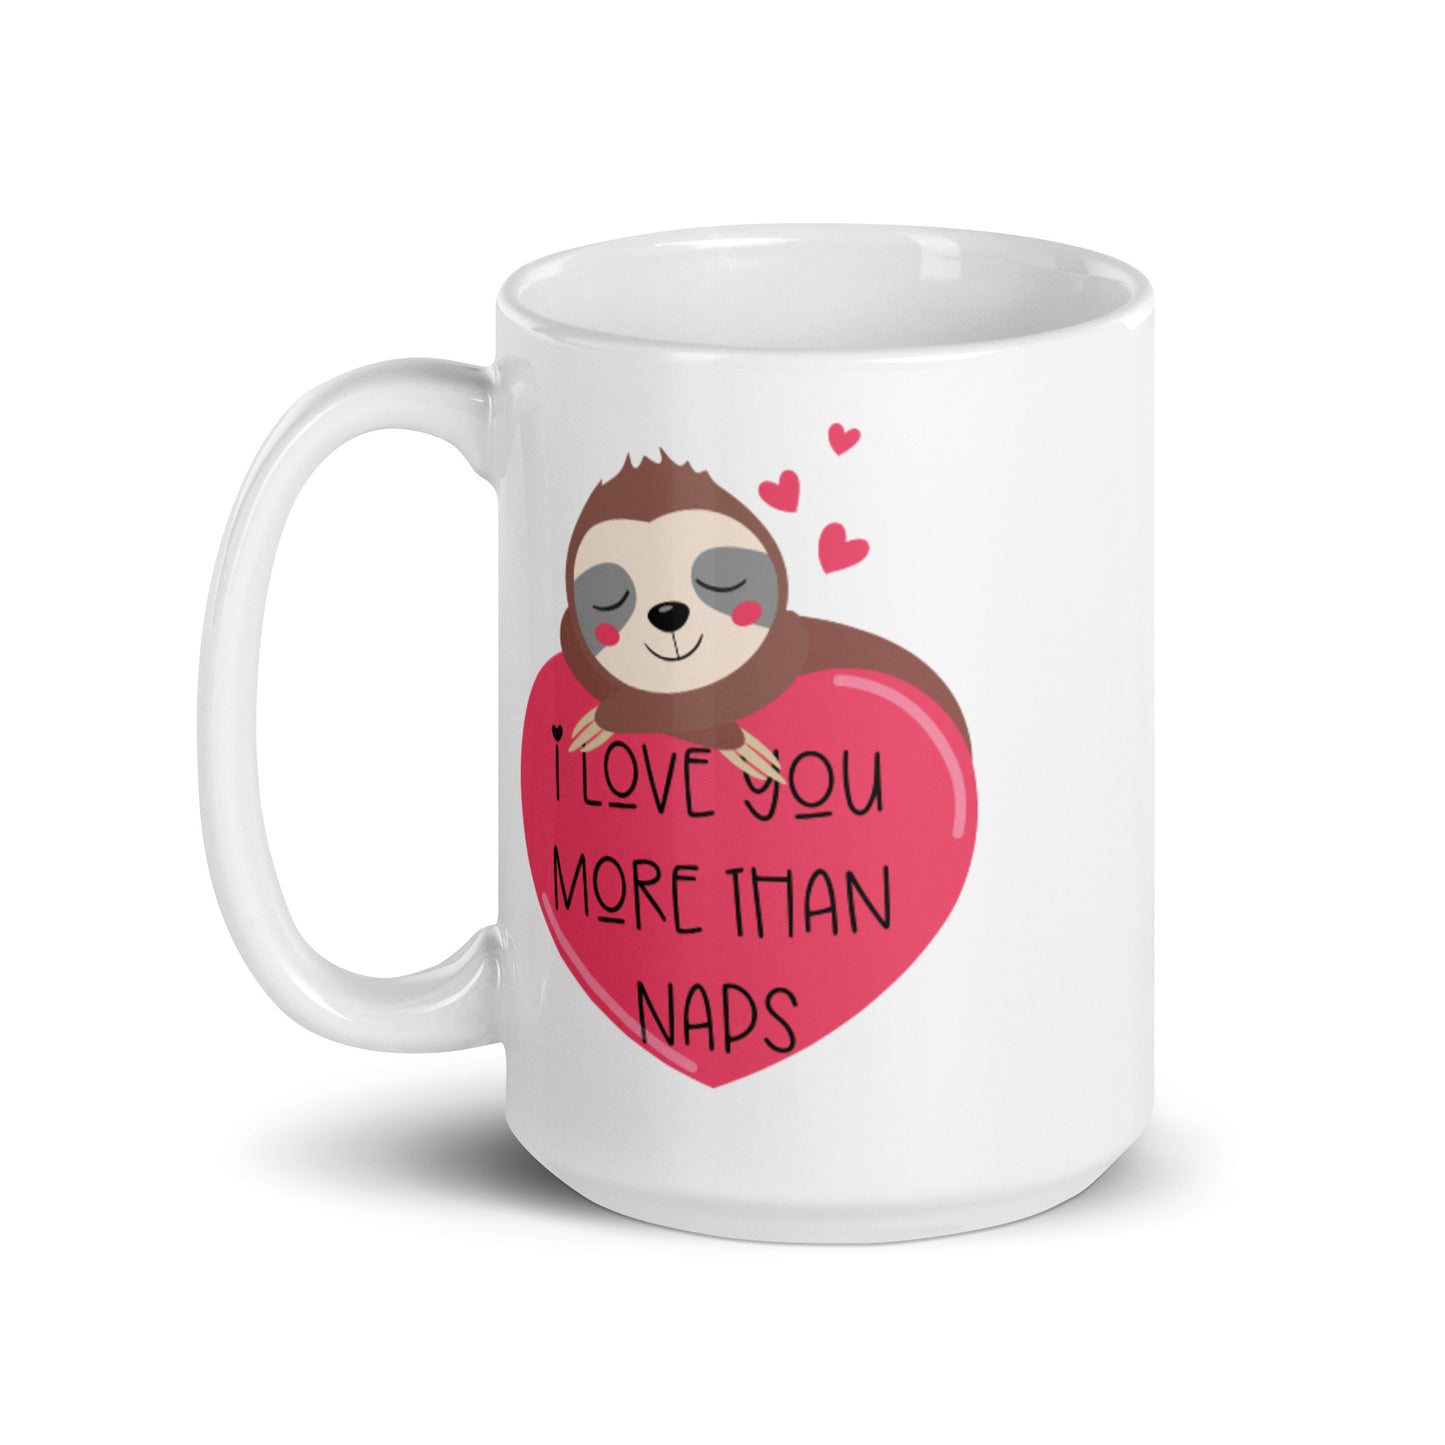 Valentines Day Coffee Mug, I Love You More than Naps Funny Sloth Heart Ceramic Cup Tea Lover Unique Microwave Safe Novelty Cool Gift